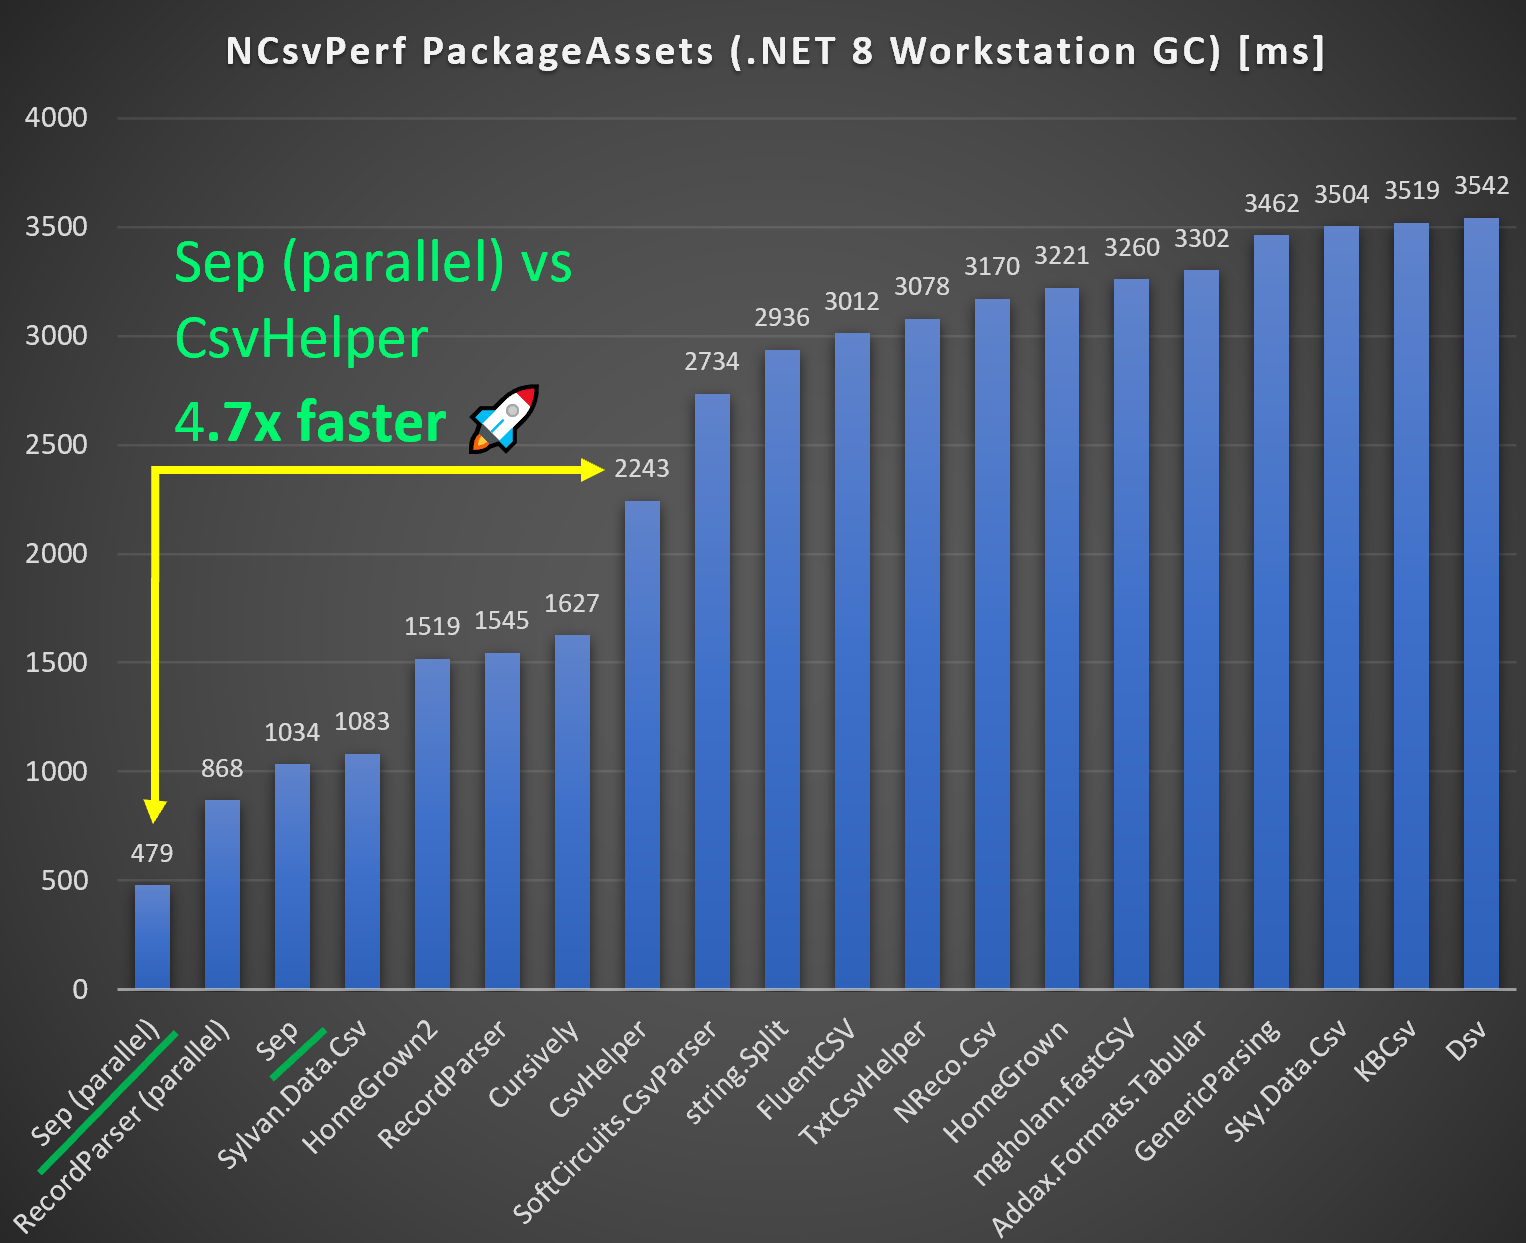 Comparing .NET CSV parsers with Workstation GC - Sep 4.7x faster than
CsvHelper